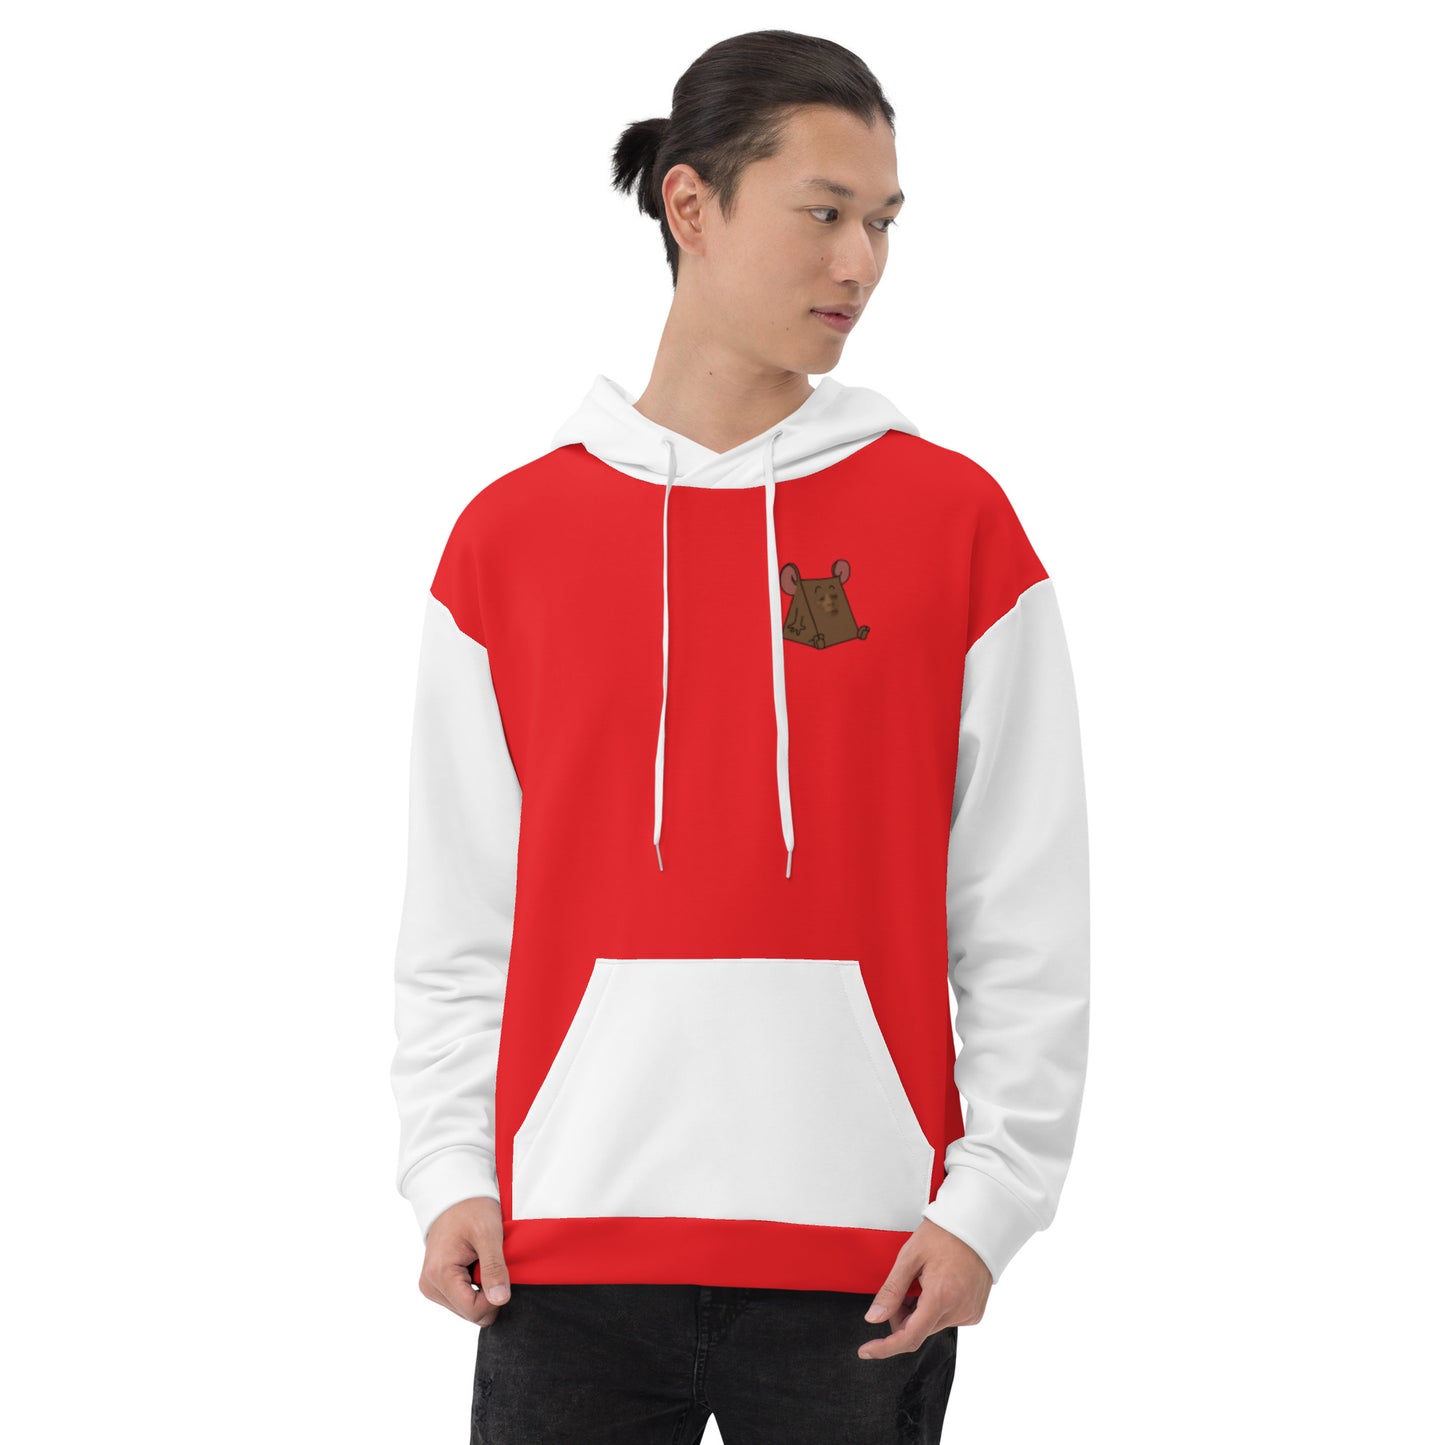 Classic Color Blocking White and Red Unisex Hoodie